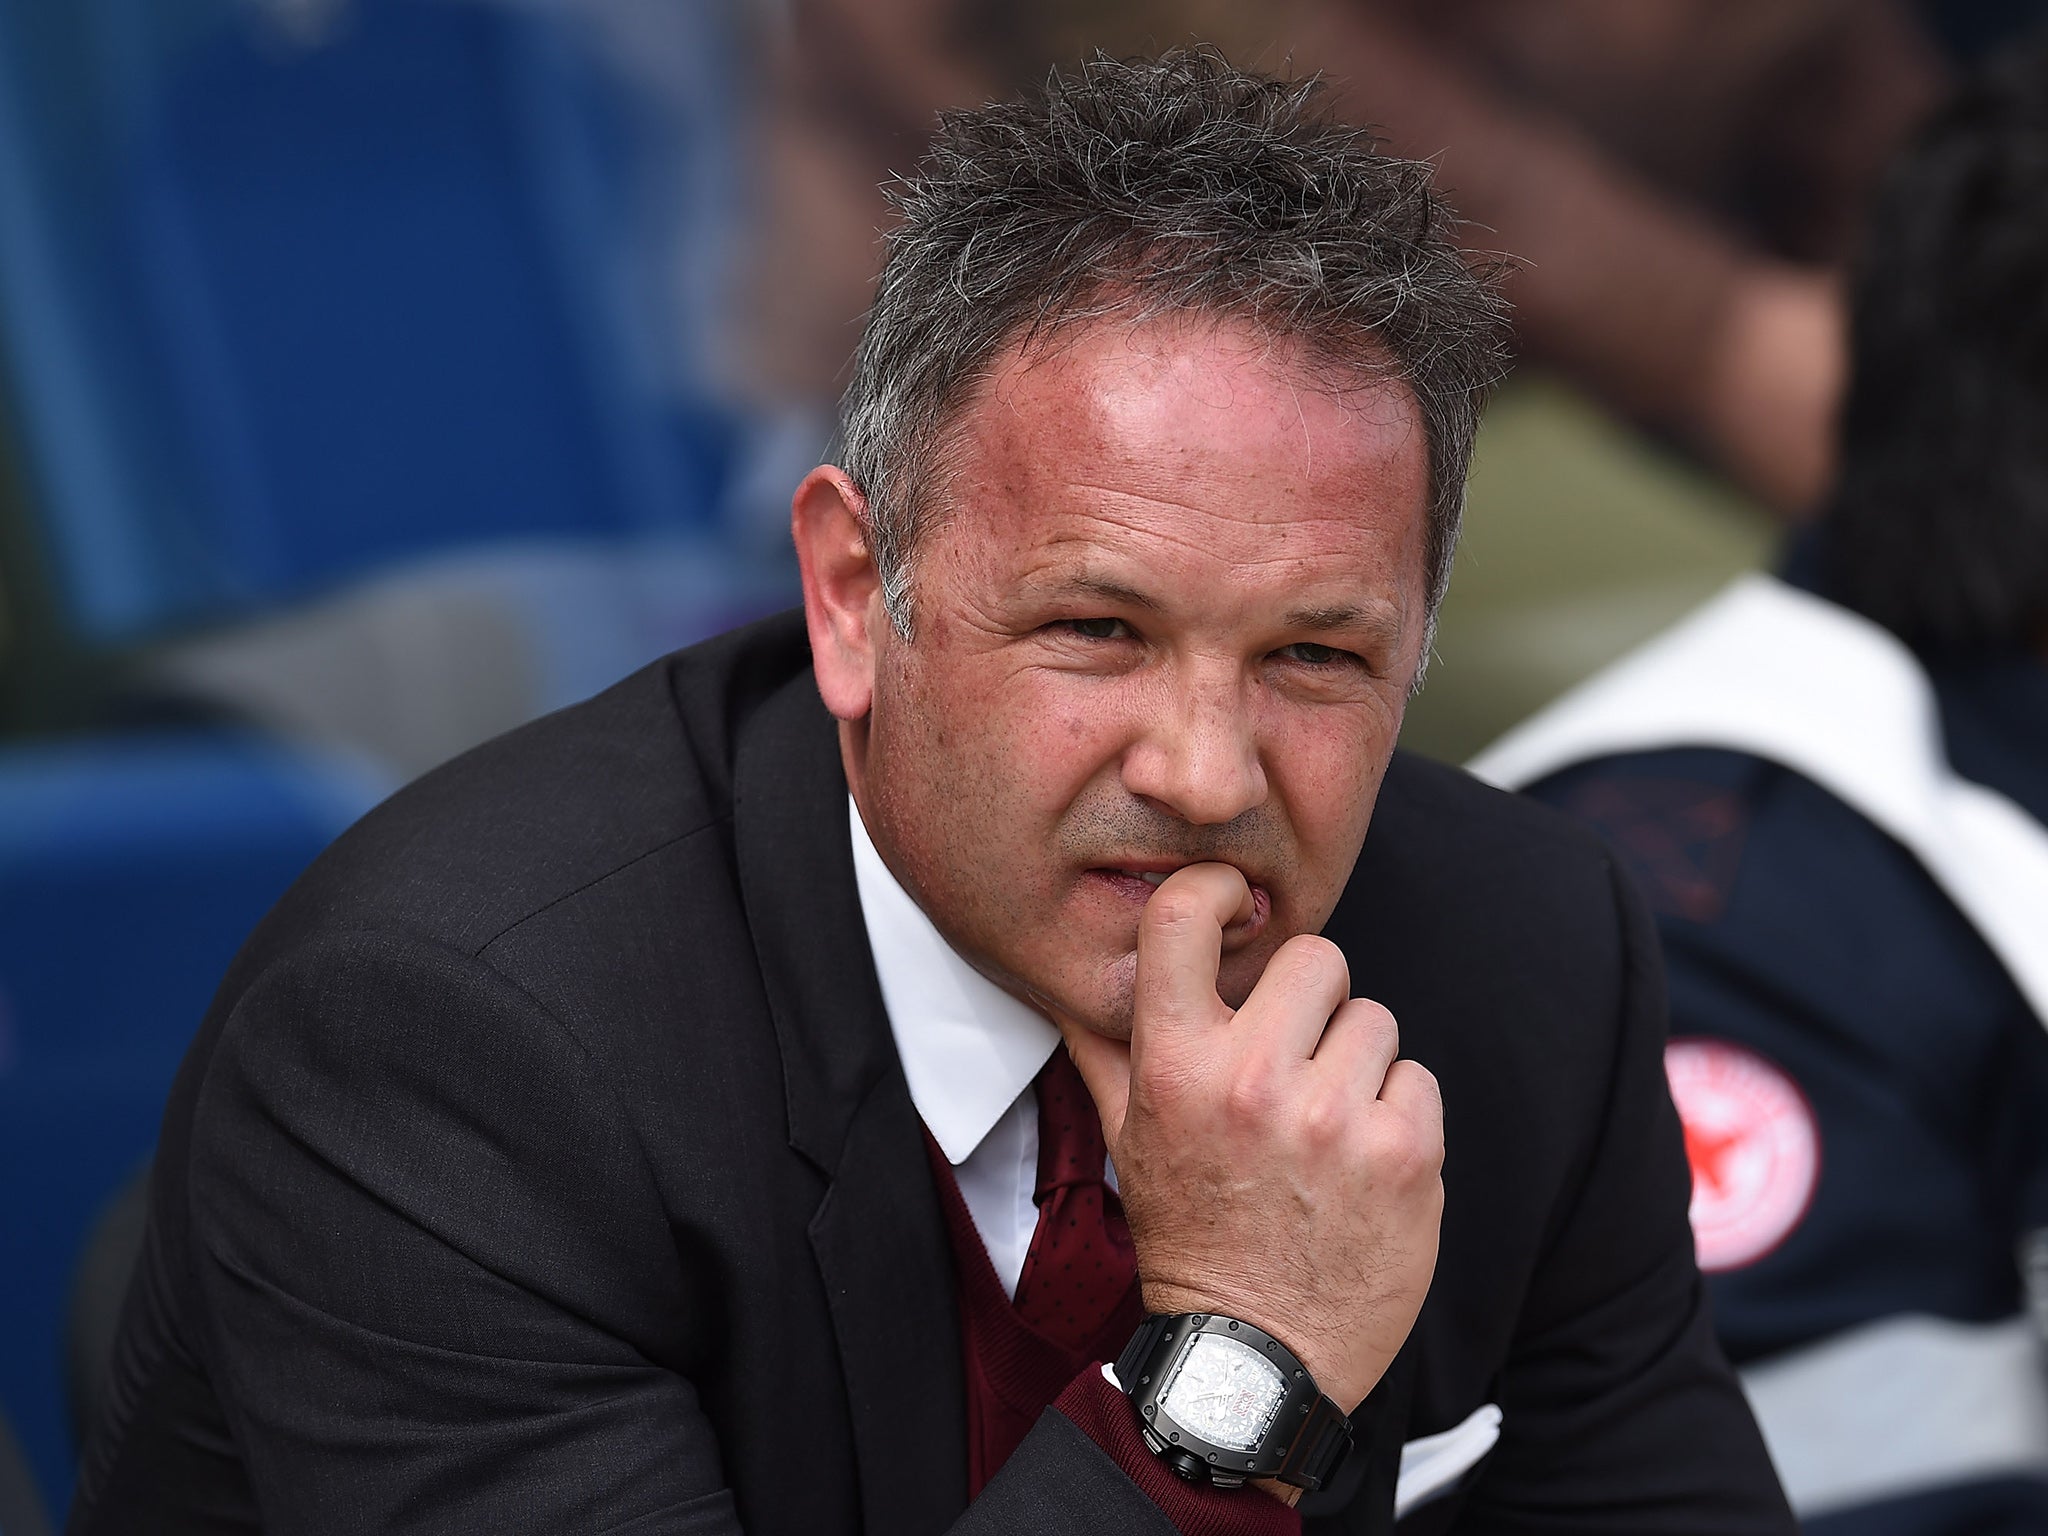 Mihajlovic's Milan were without a win in their last five league games